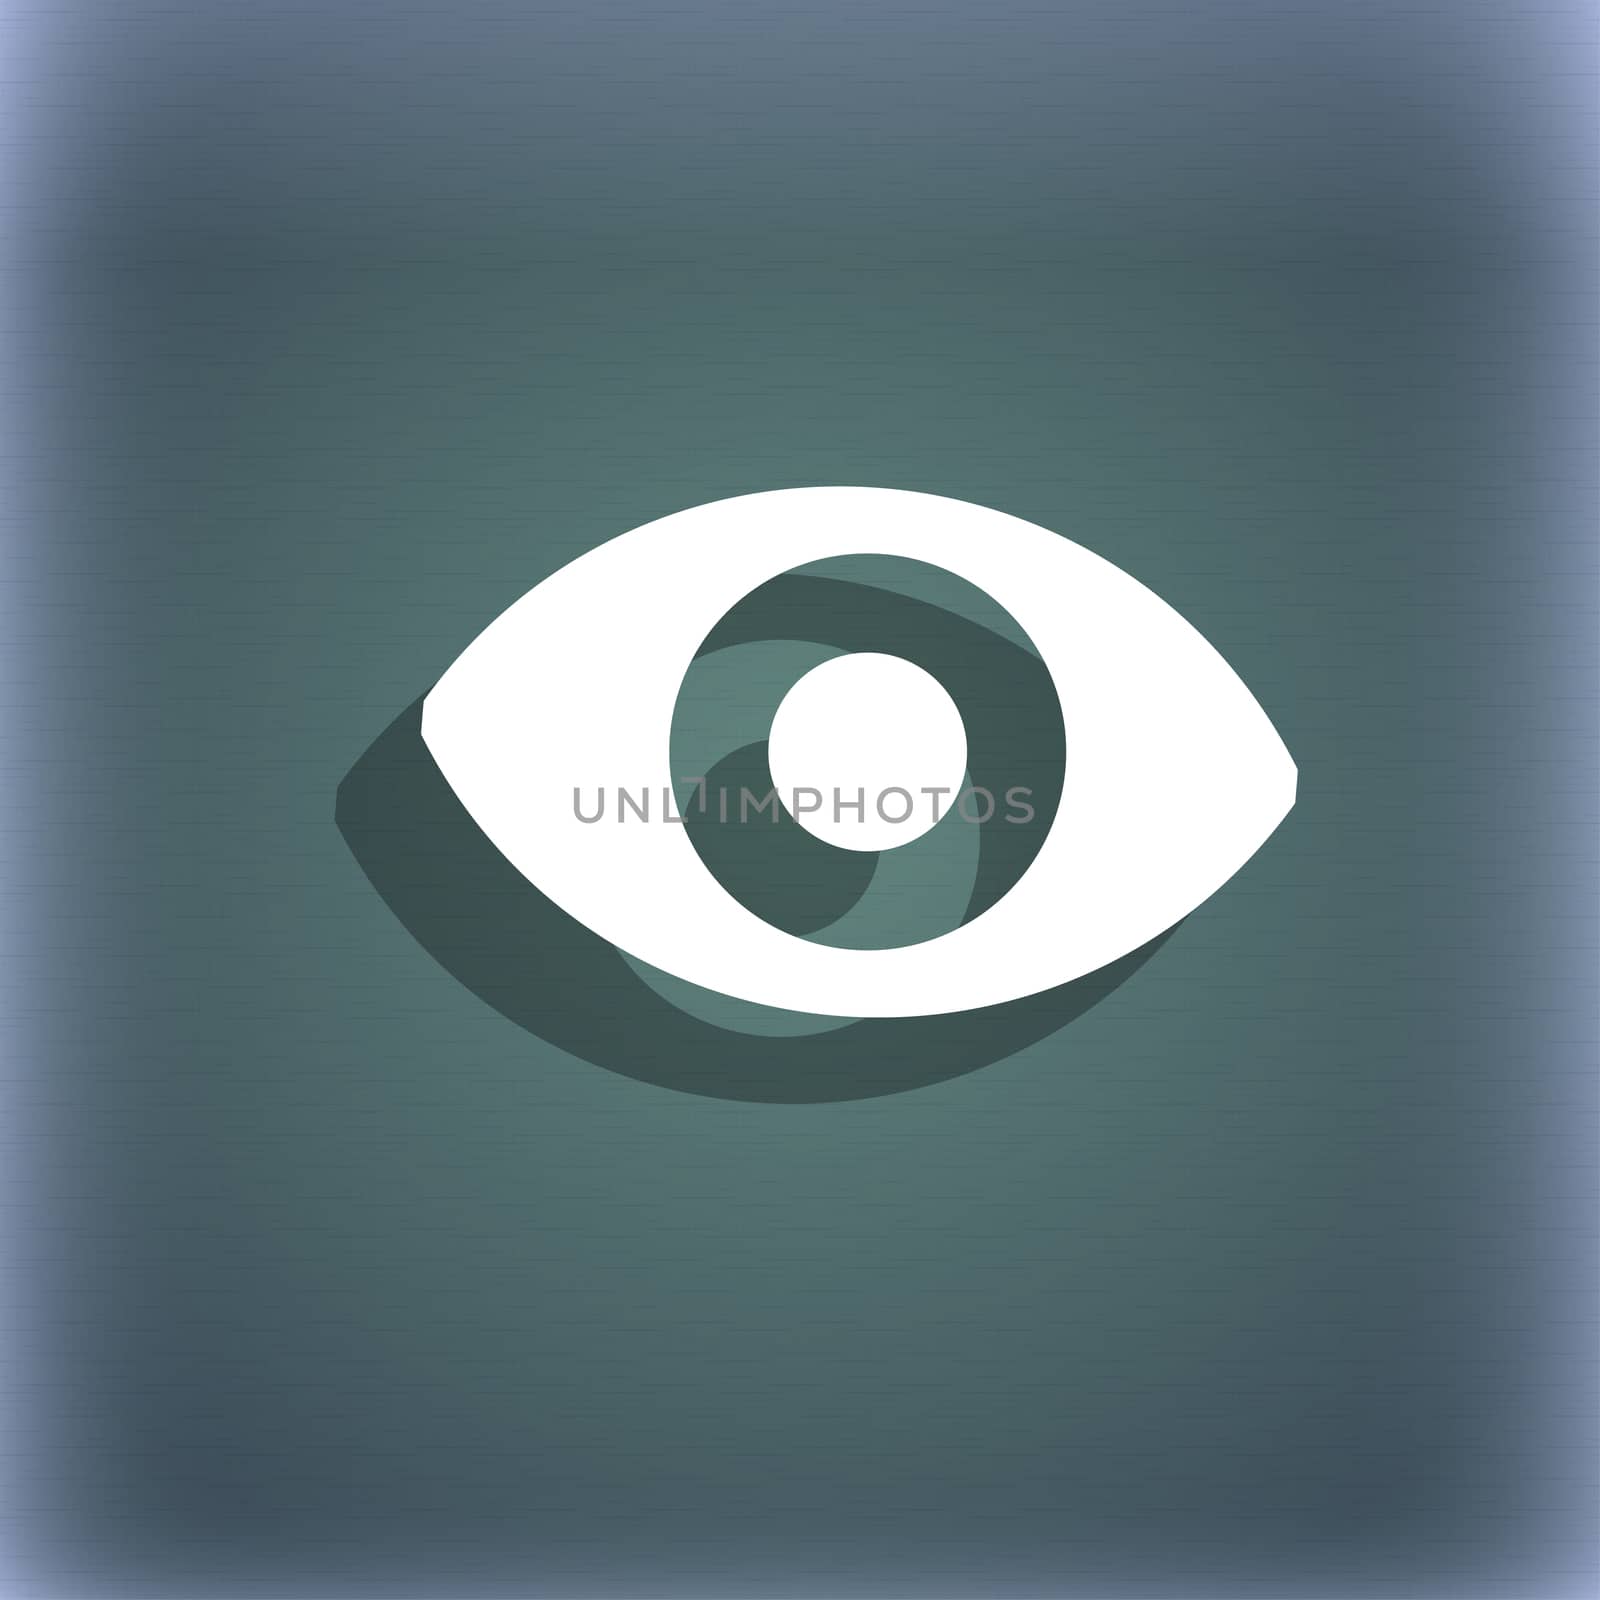 sixth sense, the eye icon symbol on the blue-green abstract background with shadow and space for your text.  by serhii_lohvyniuk